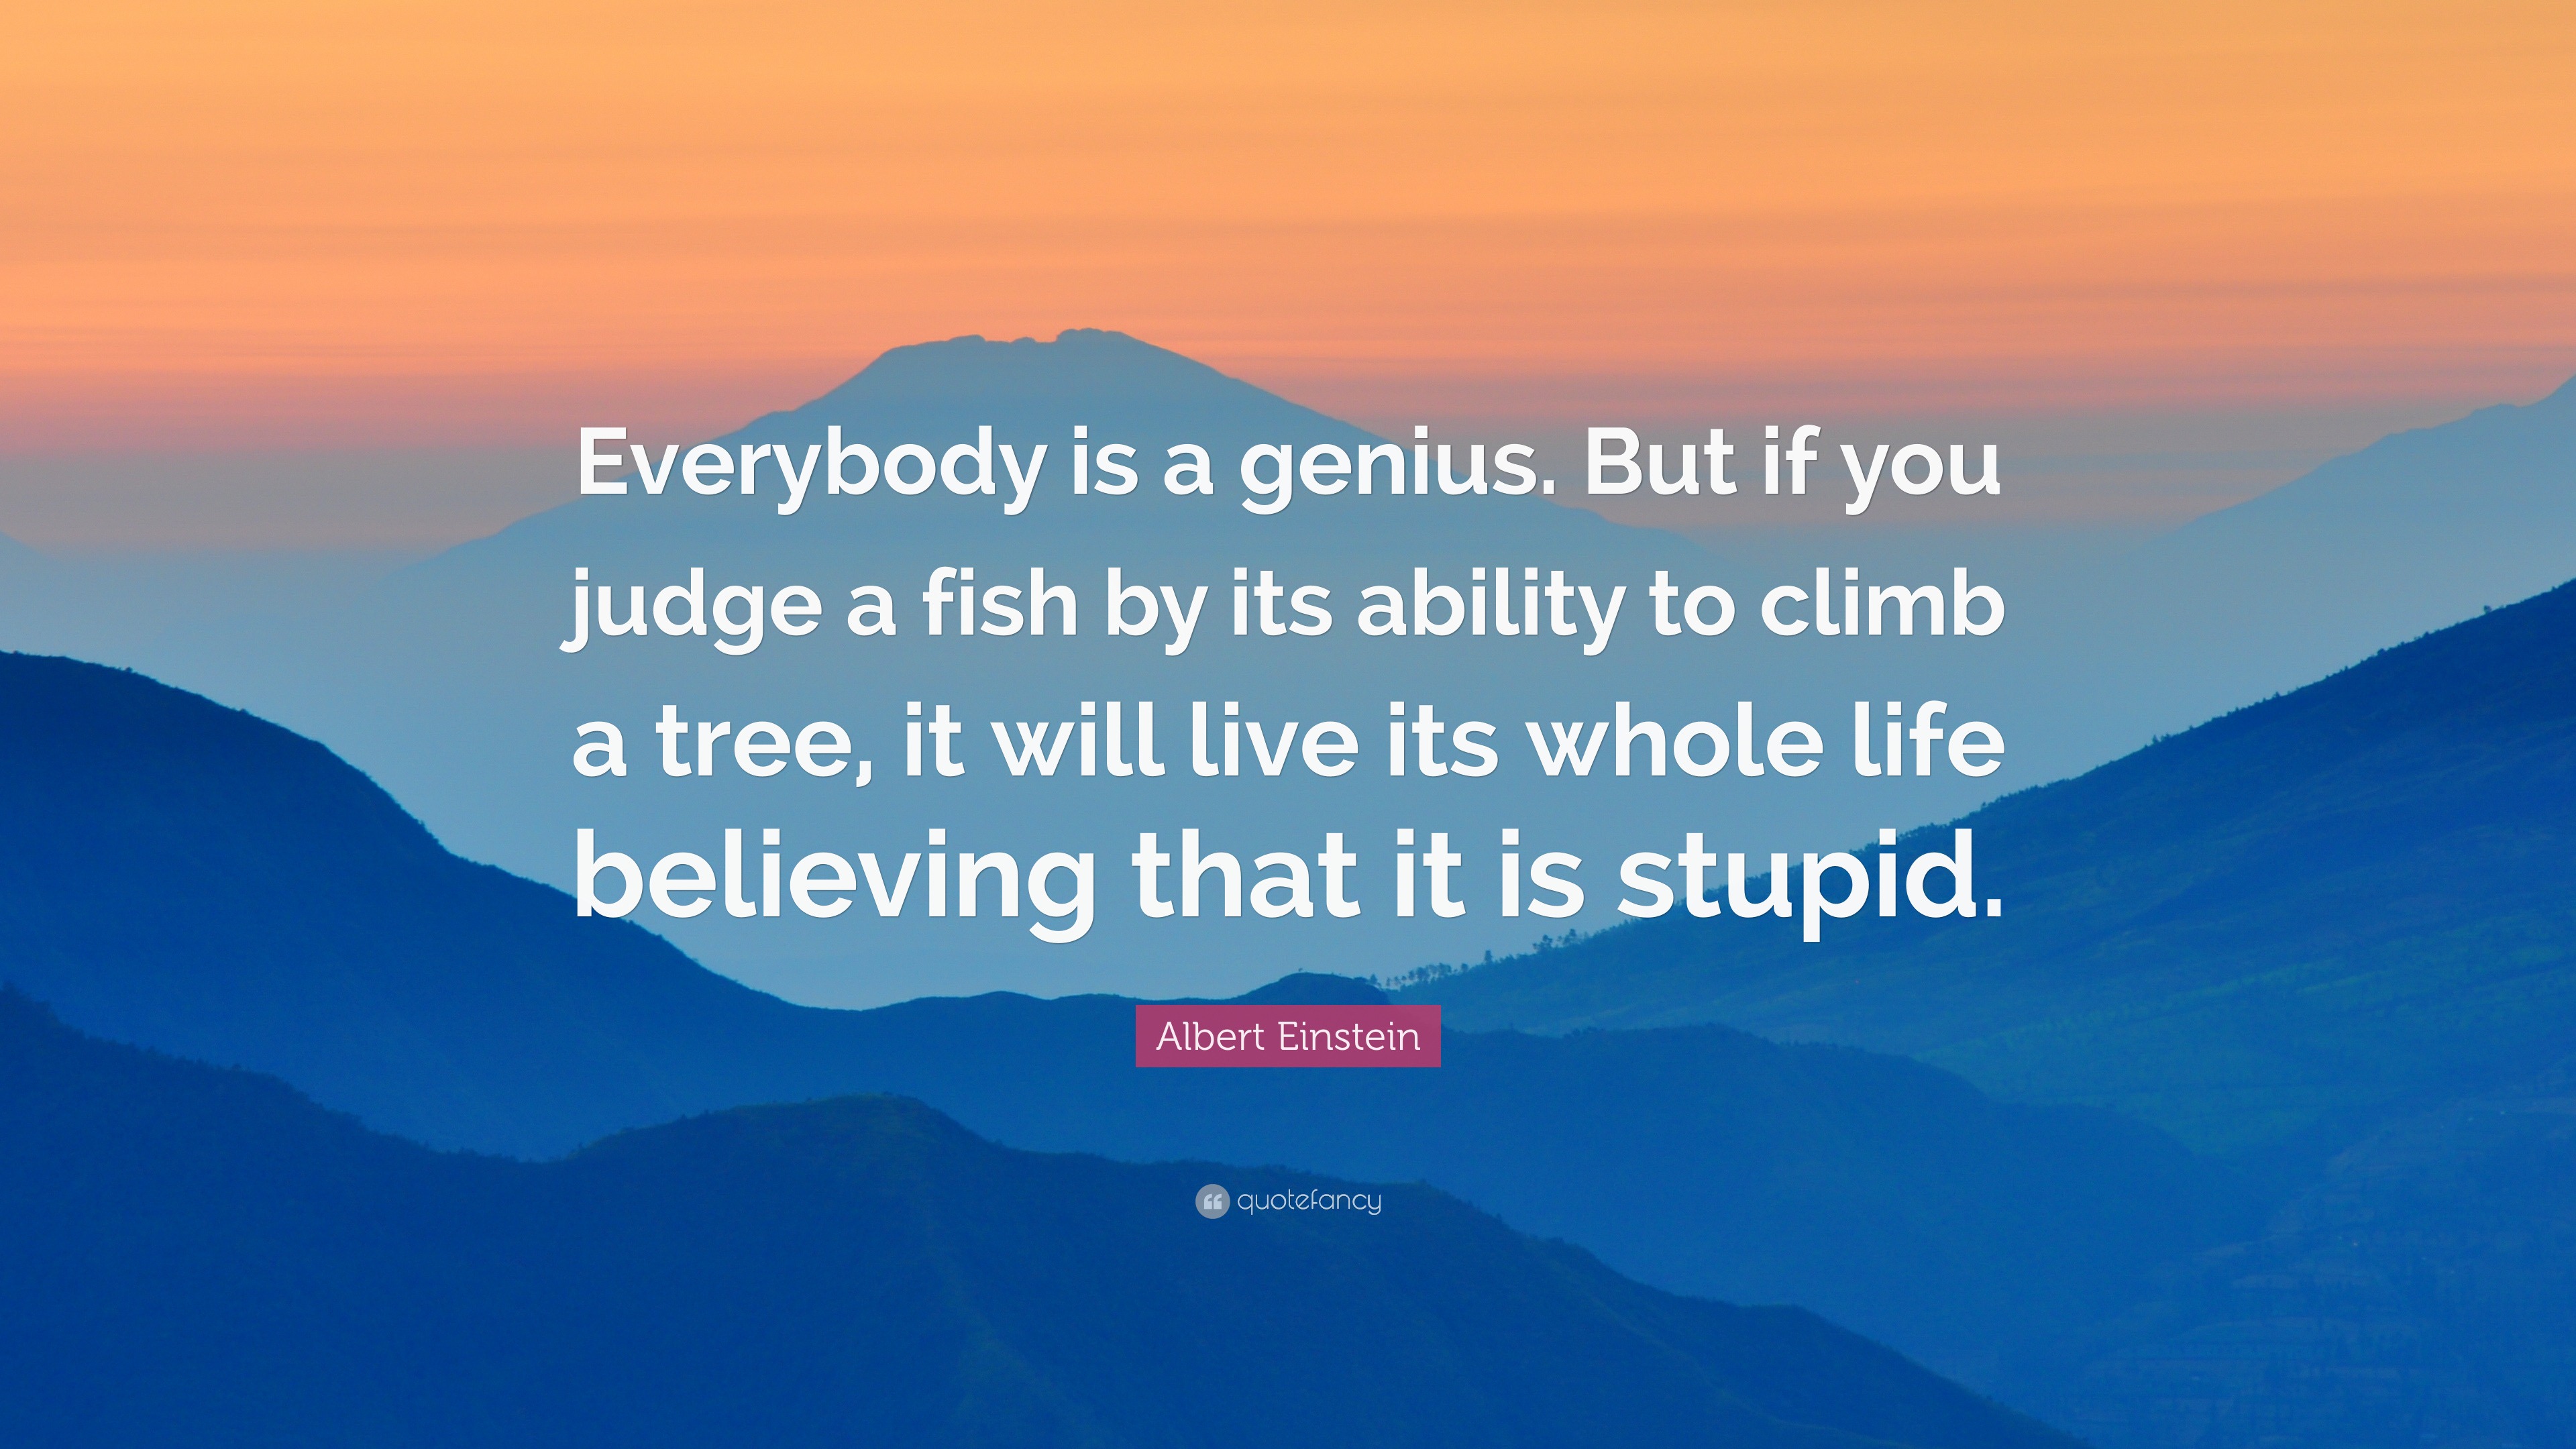 Albert Einstein Quote “Everybody is a genius. But if you judge a fish